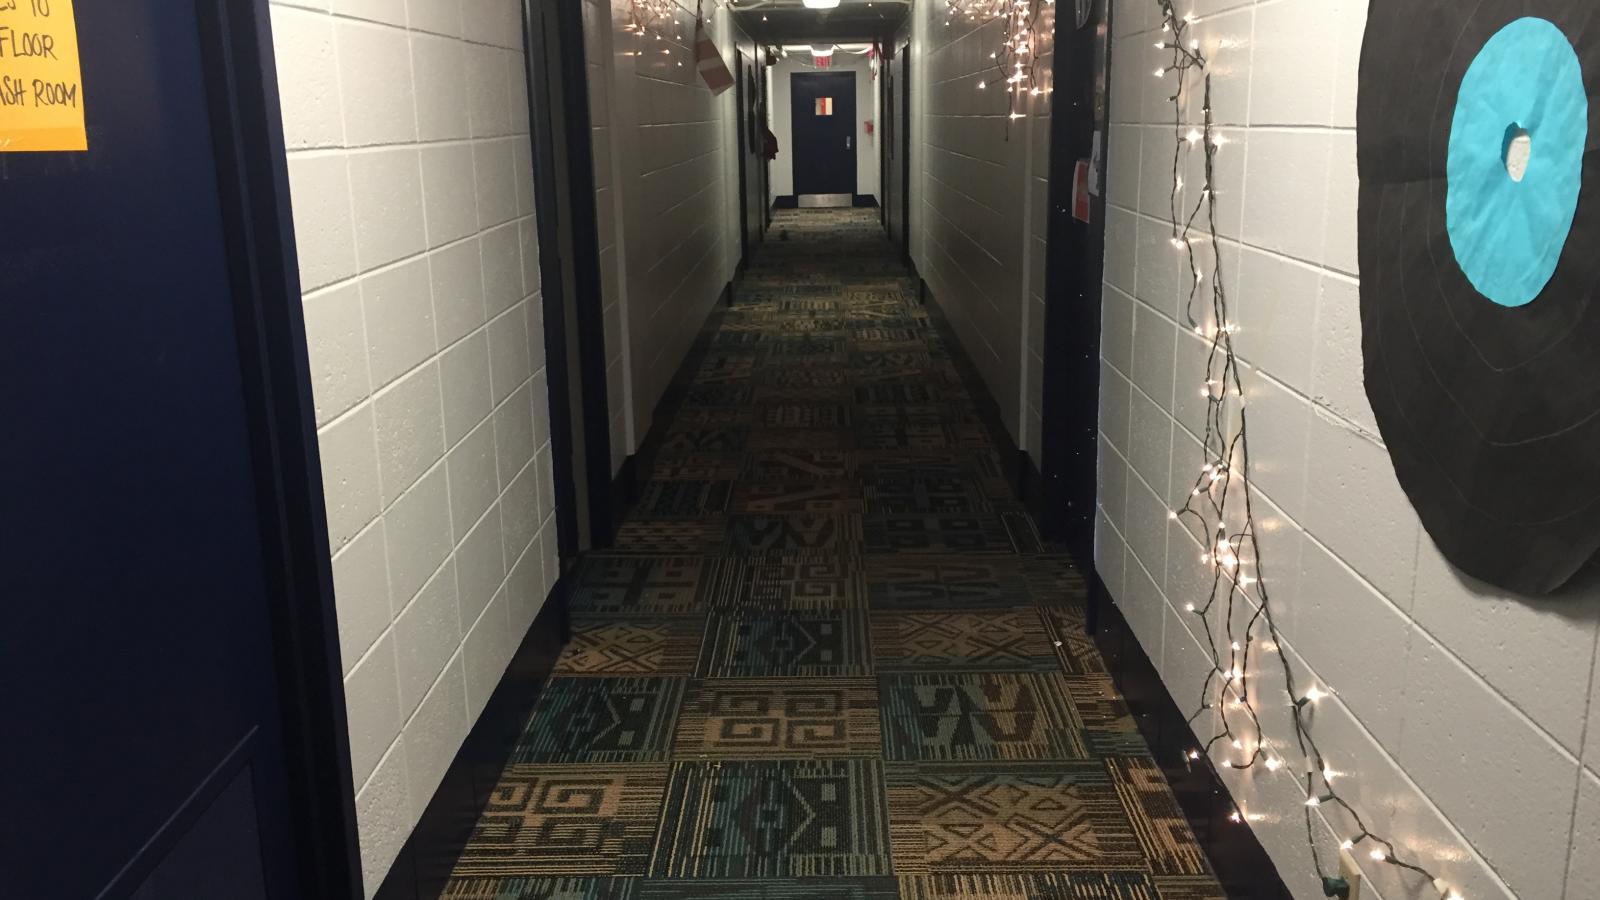 Ohio State University Campus Religion: Christmas Lights in Taylor Tower